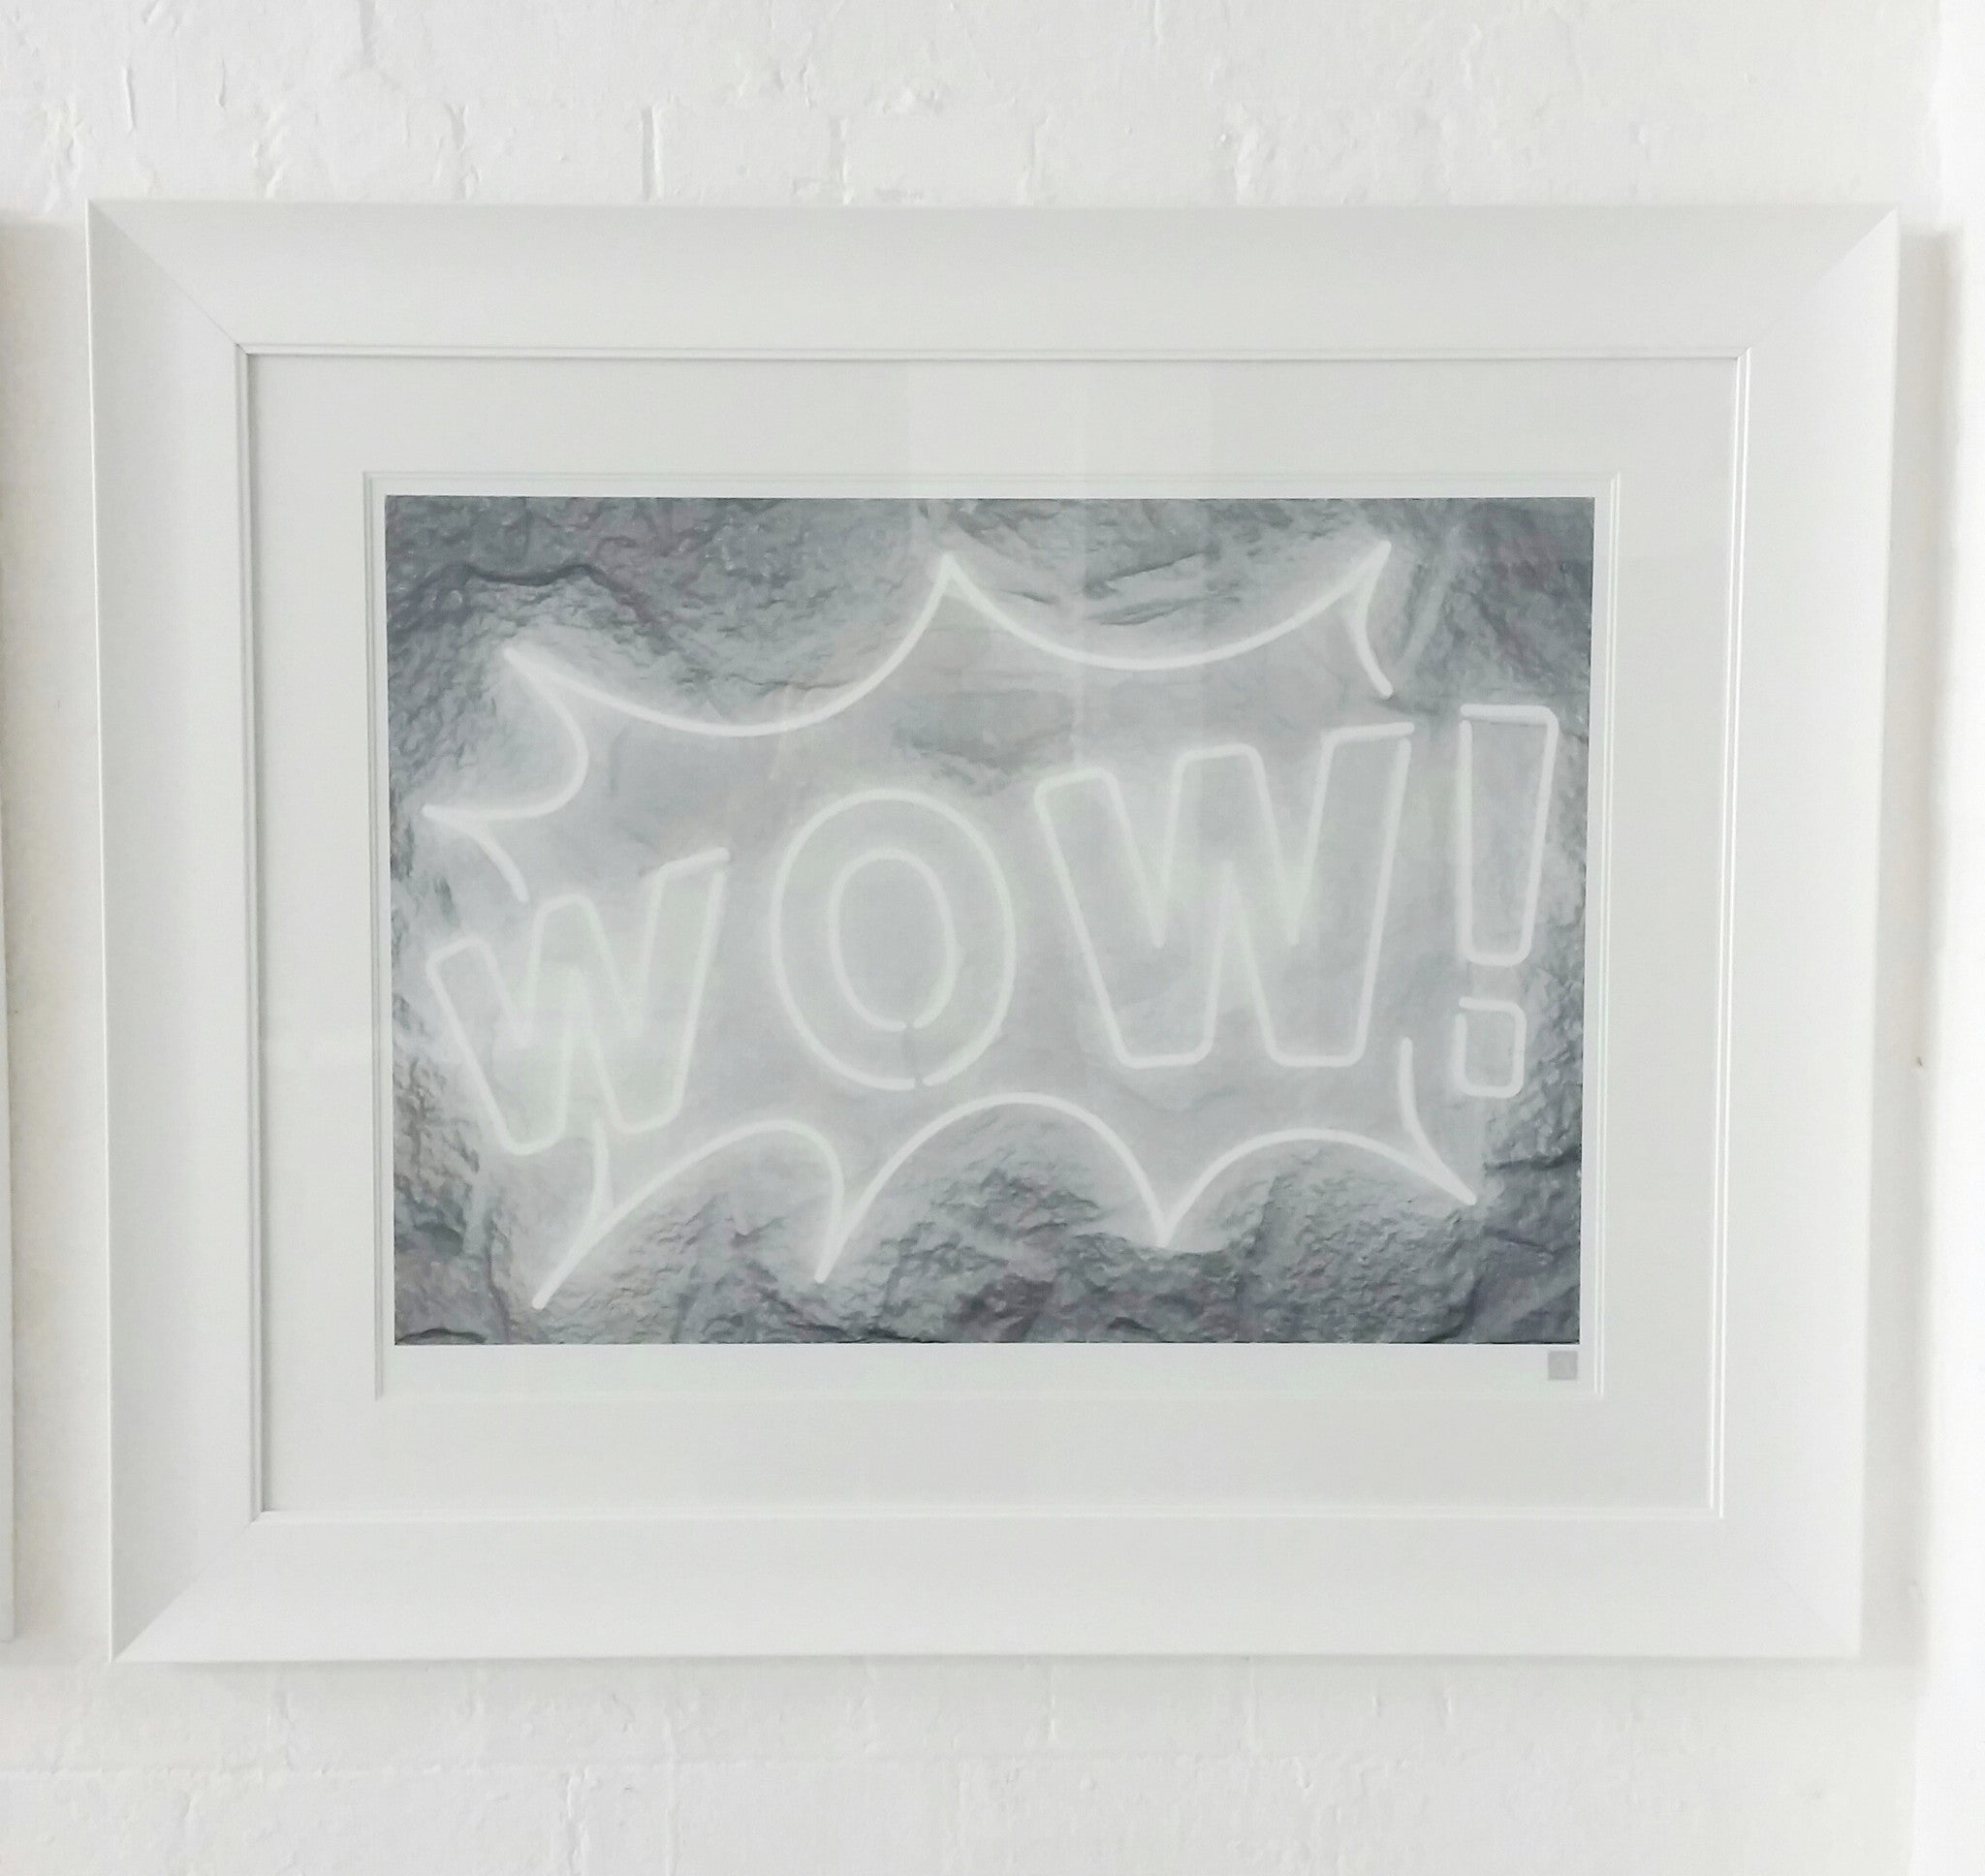 Courty - 'WOW!' -  Framed Limited Edition artwork